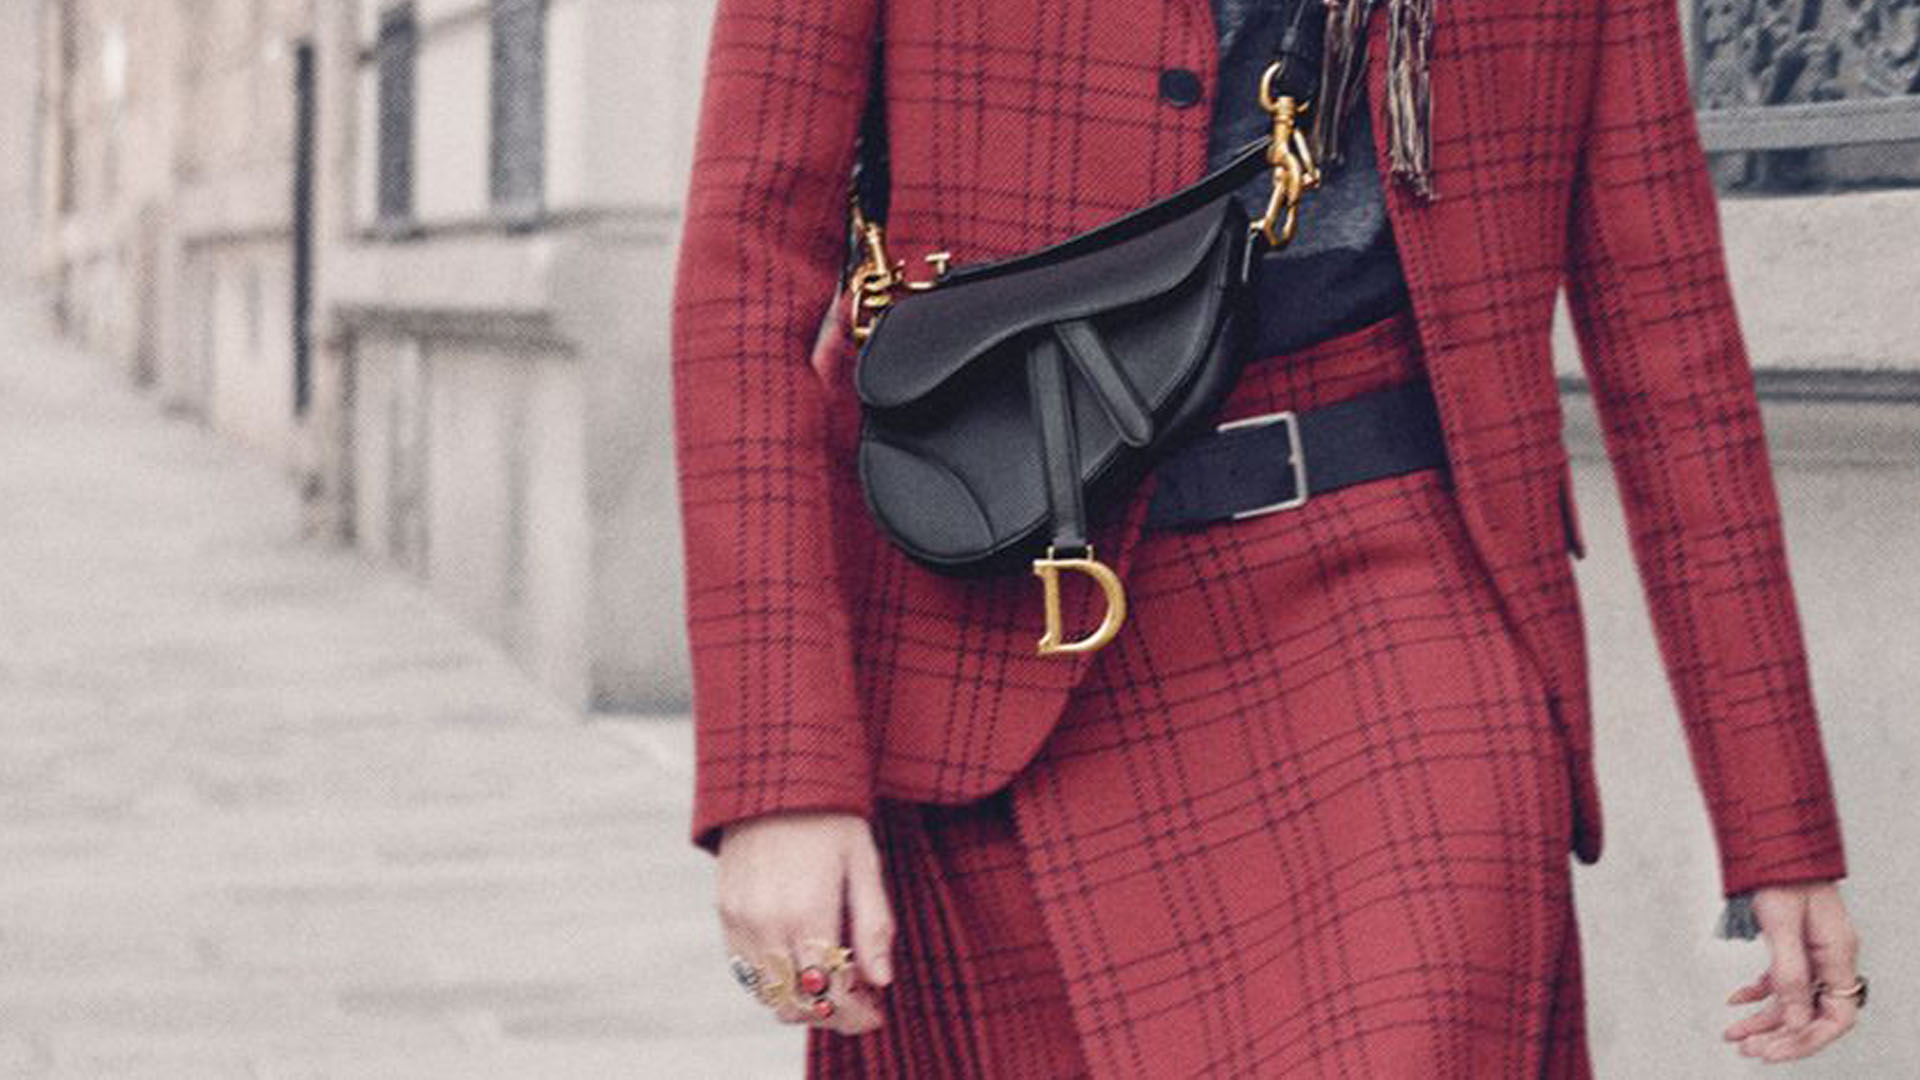 Dior Has Brought Back Its Iconic Saddle Bag